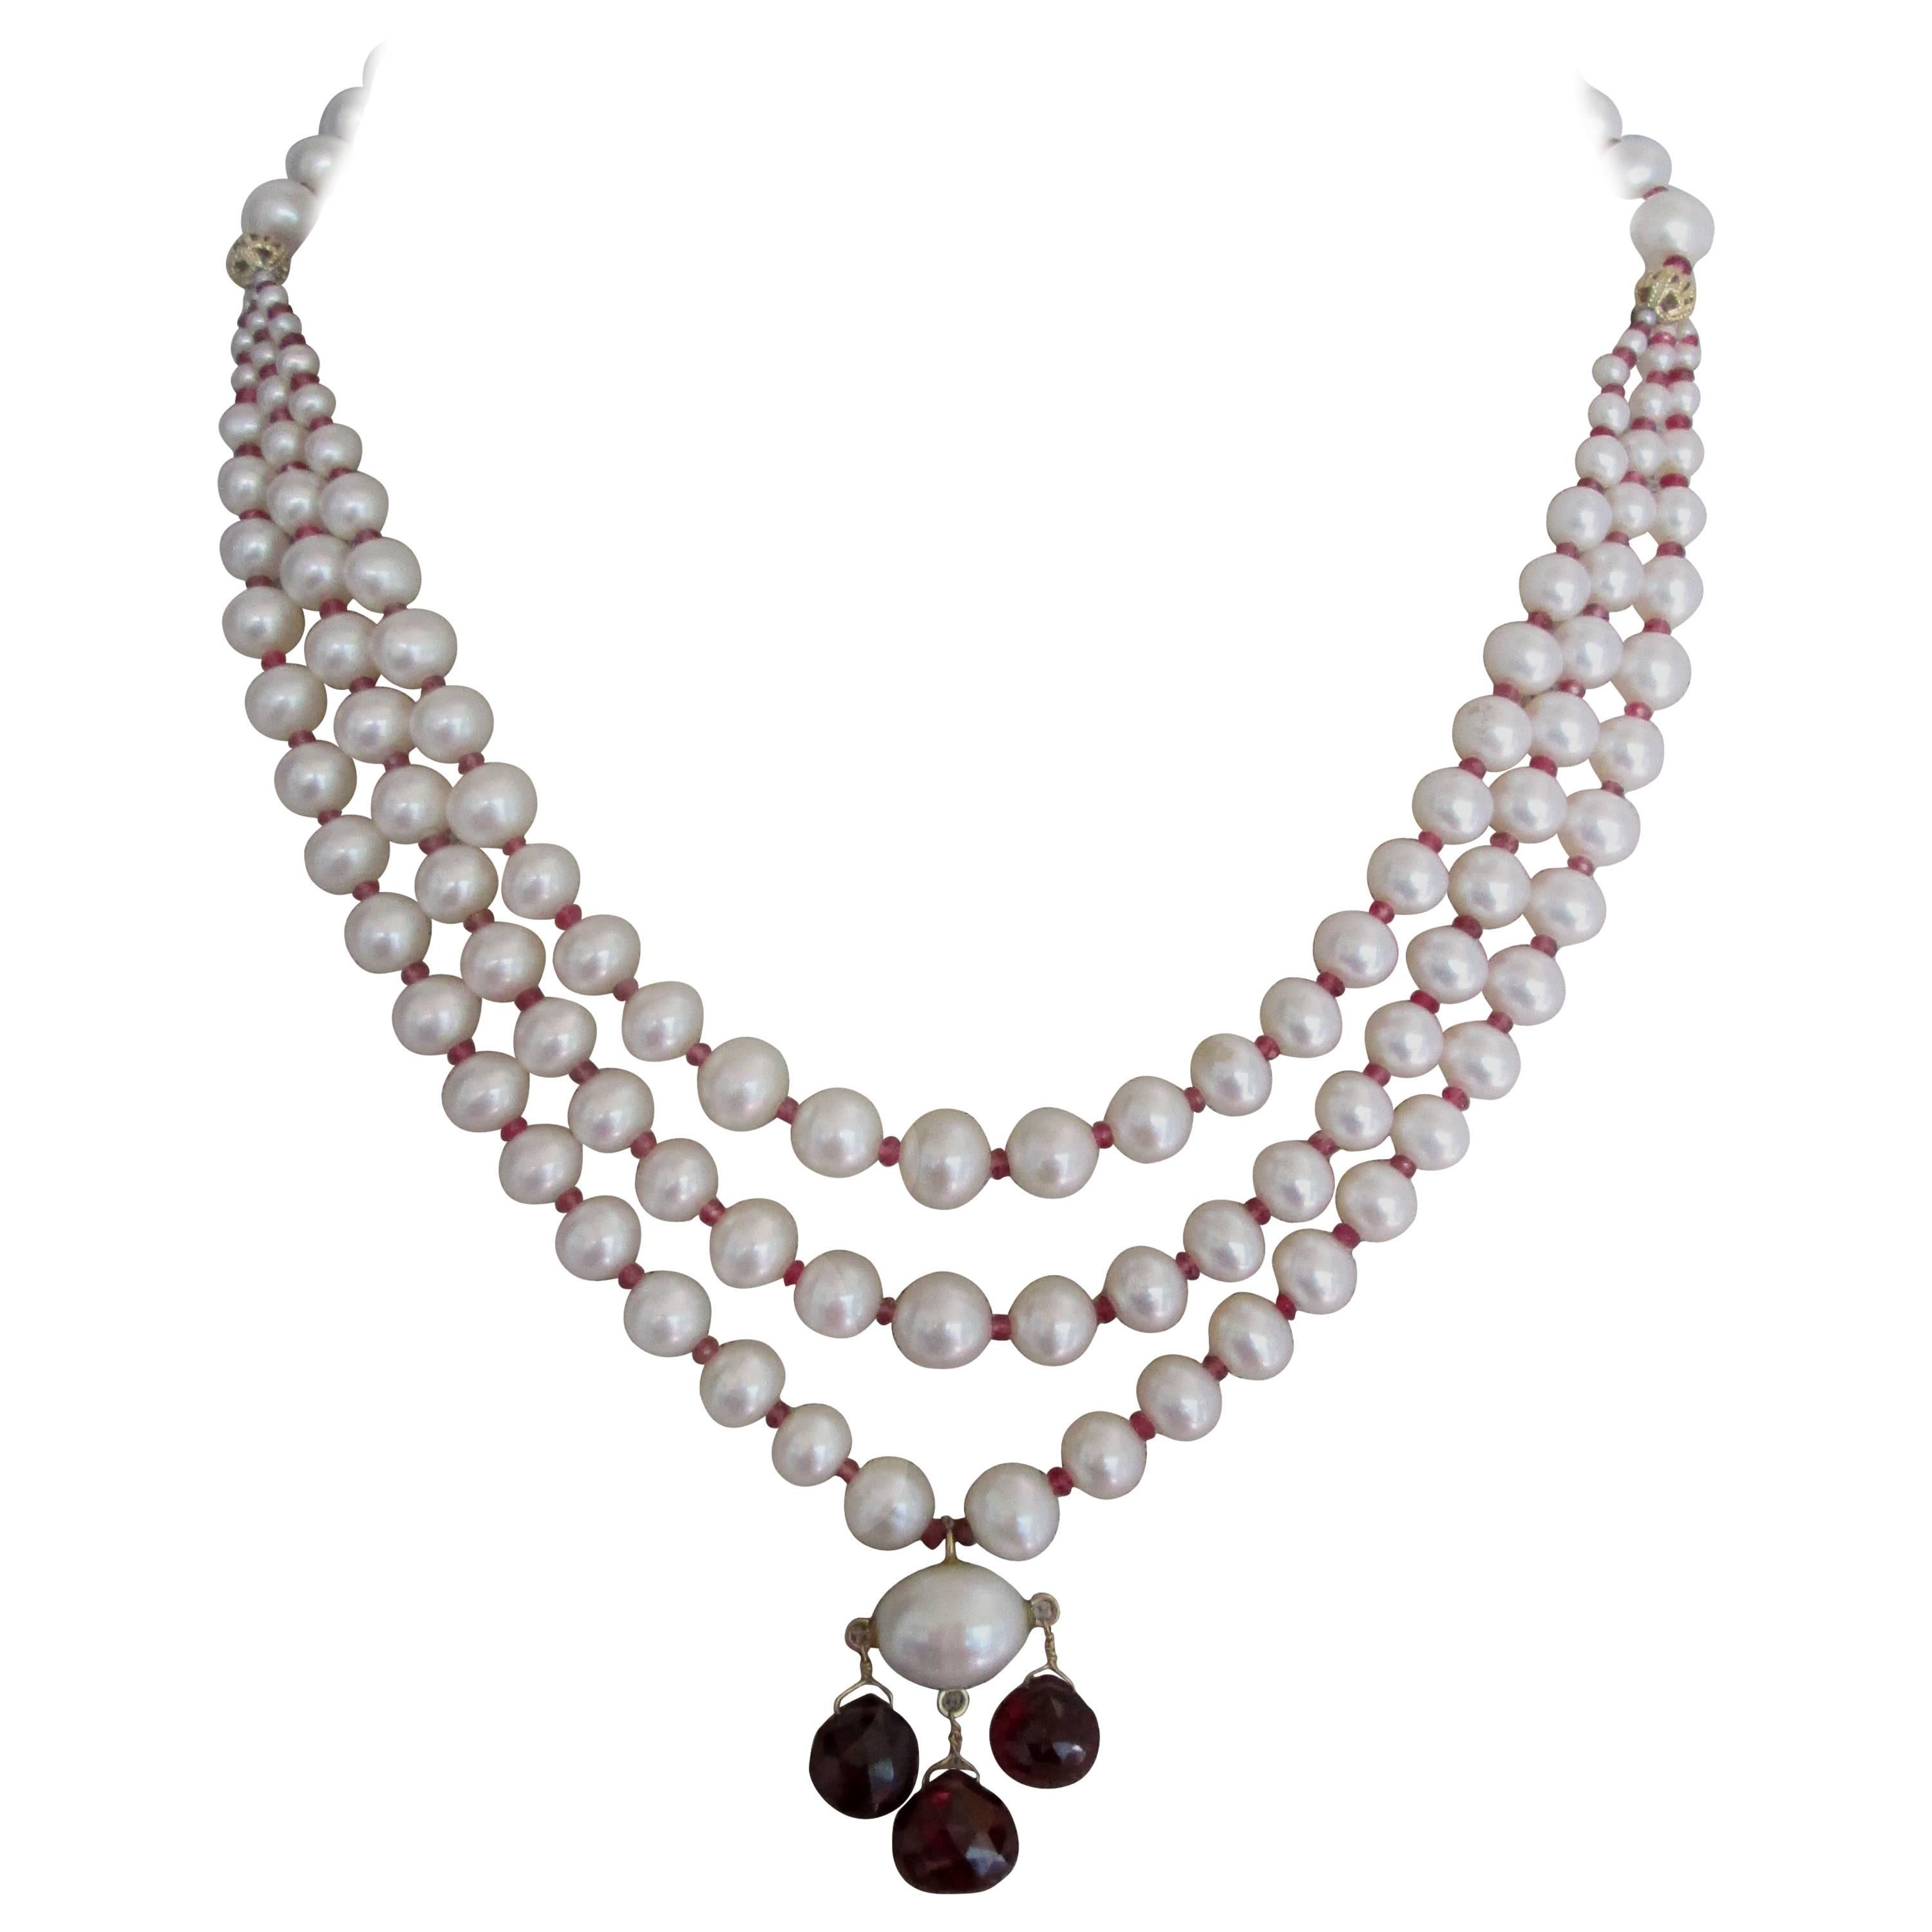 Marina J. 3 Strands of Graduated Pearl Necklace with Garnet & 14k Yellow Gold